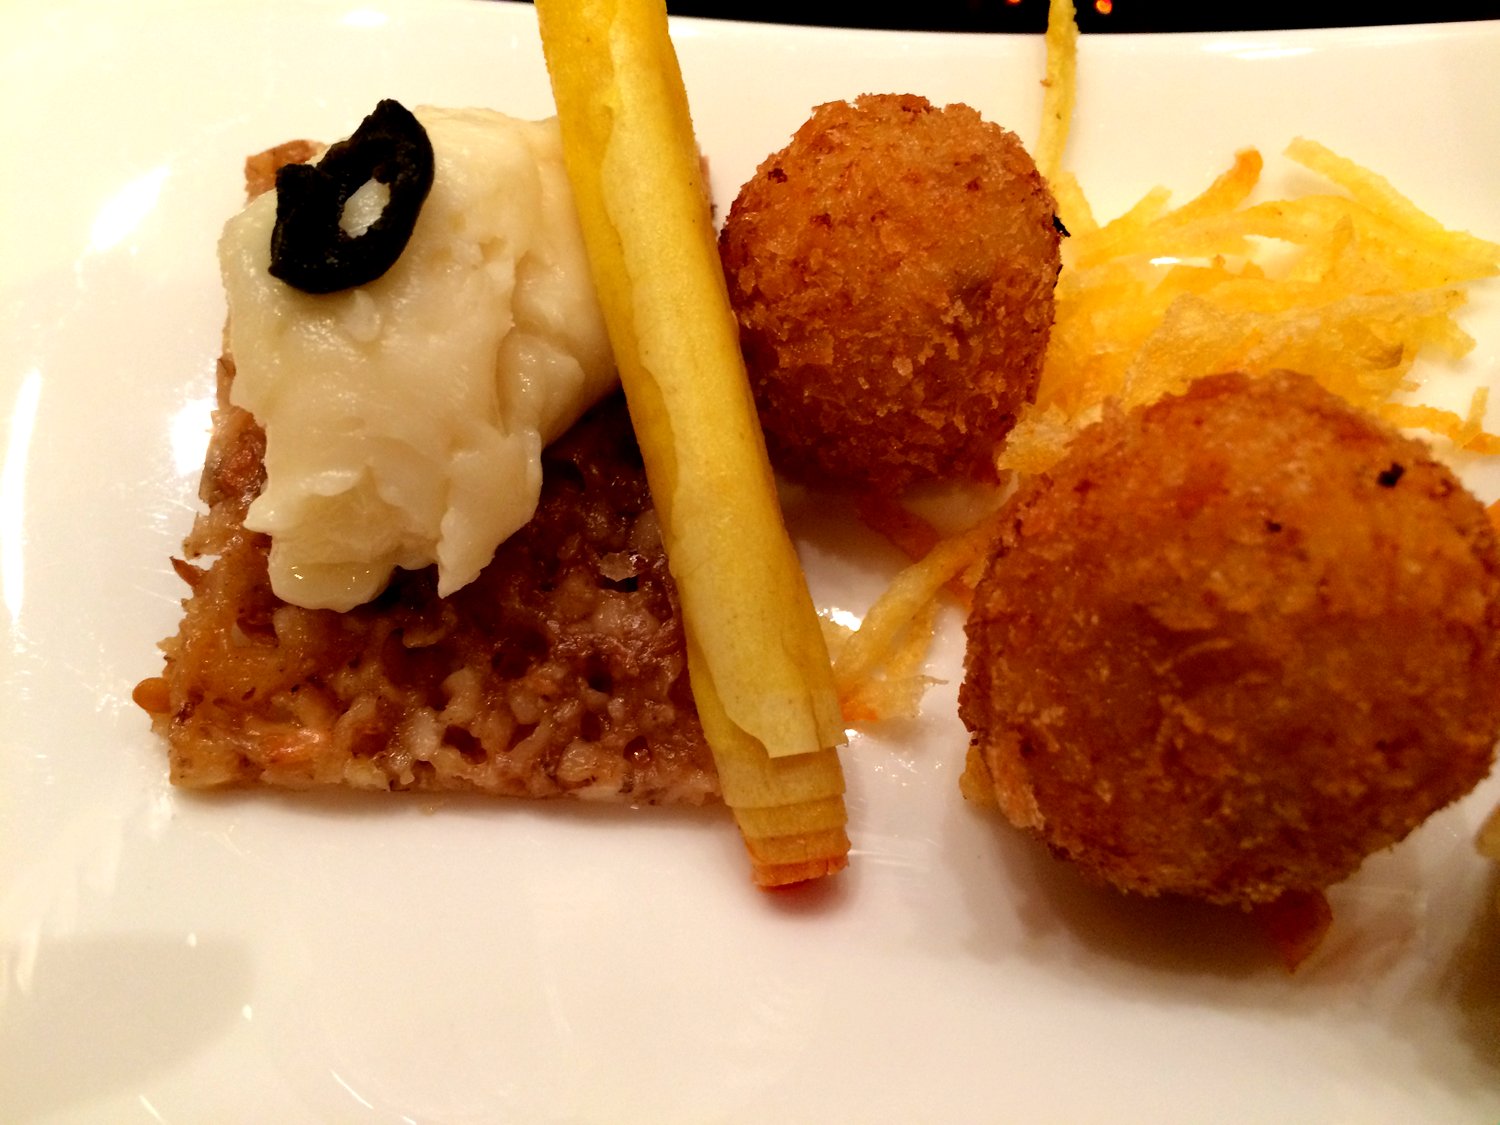 A rice/seed cracker with cheese, a cylinder, and ham croquettes